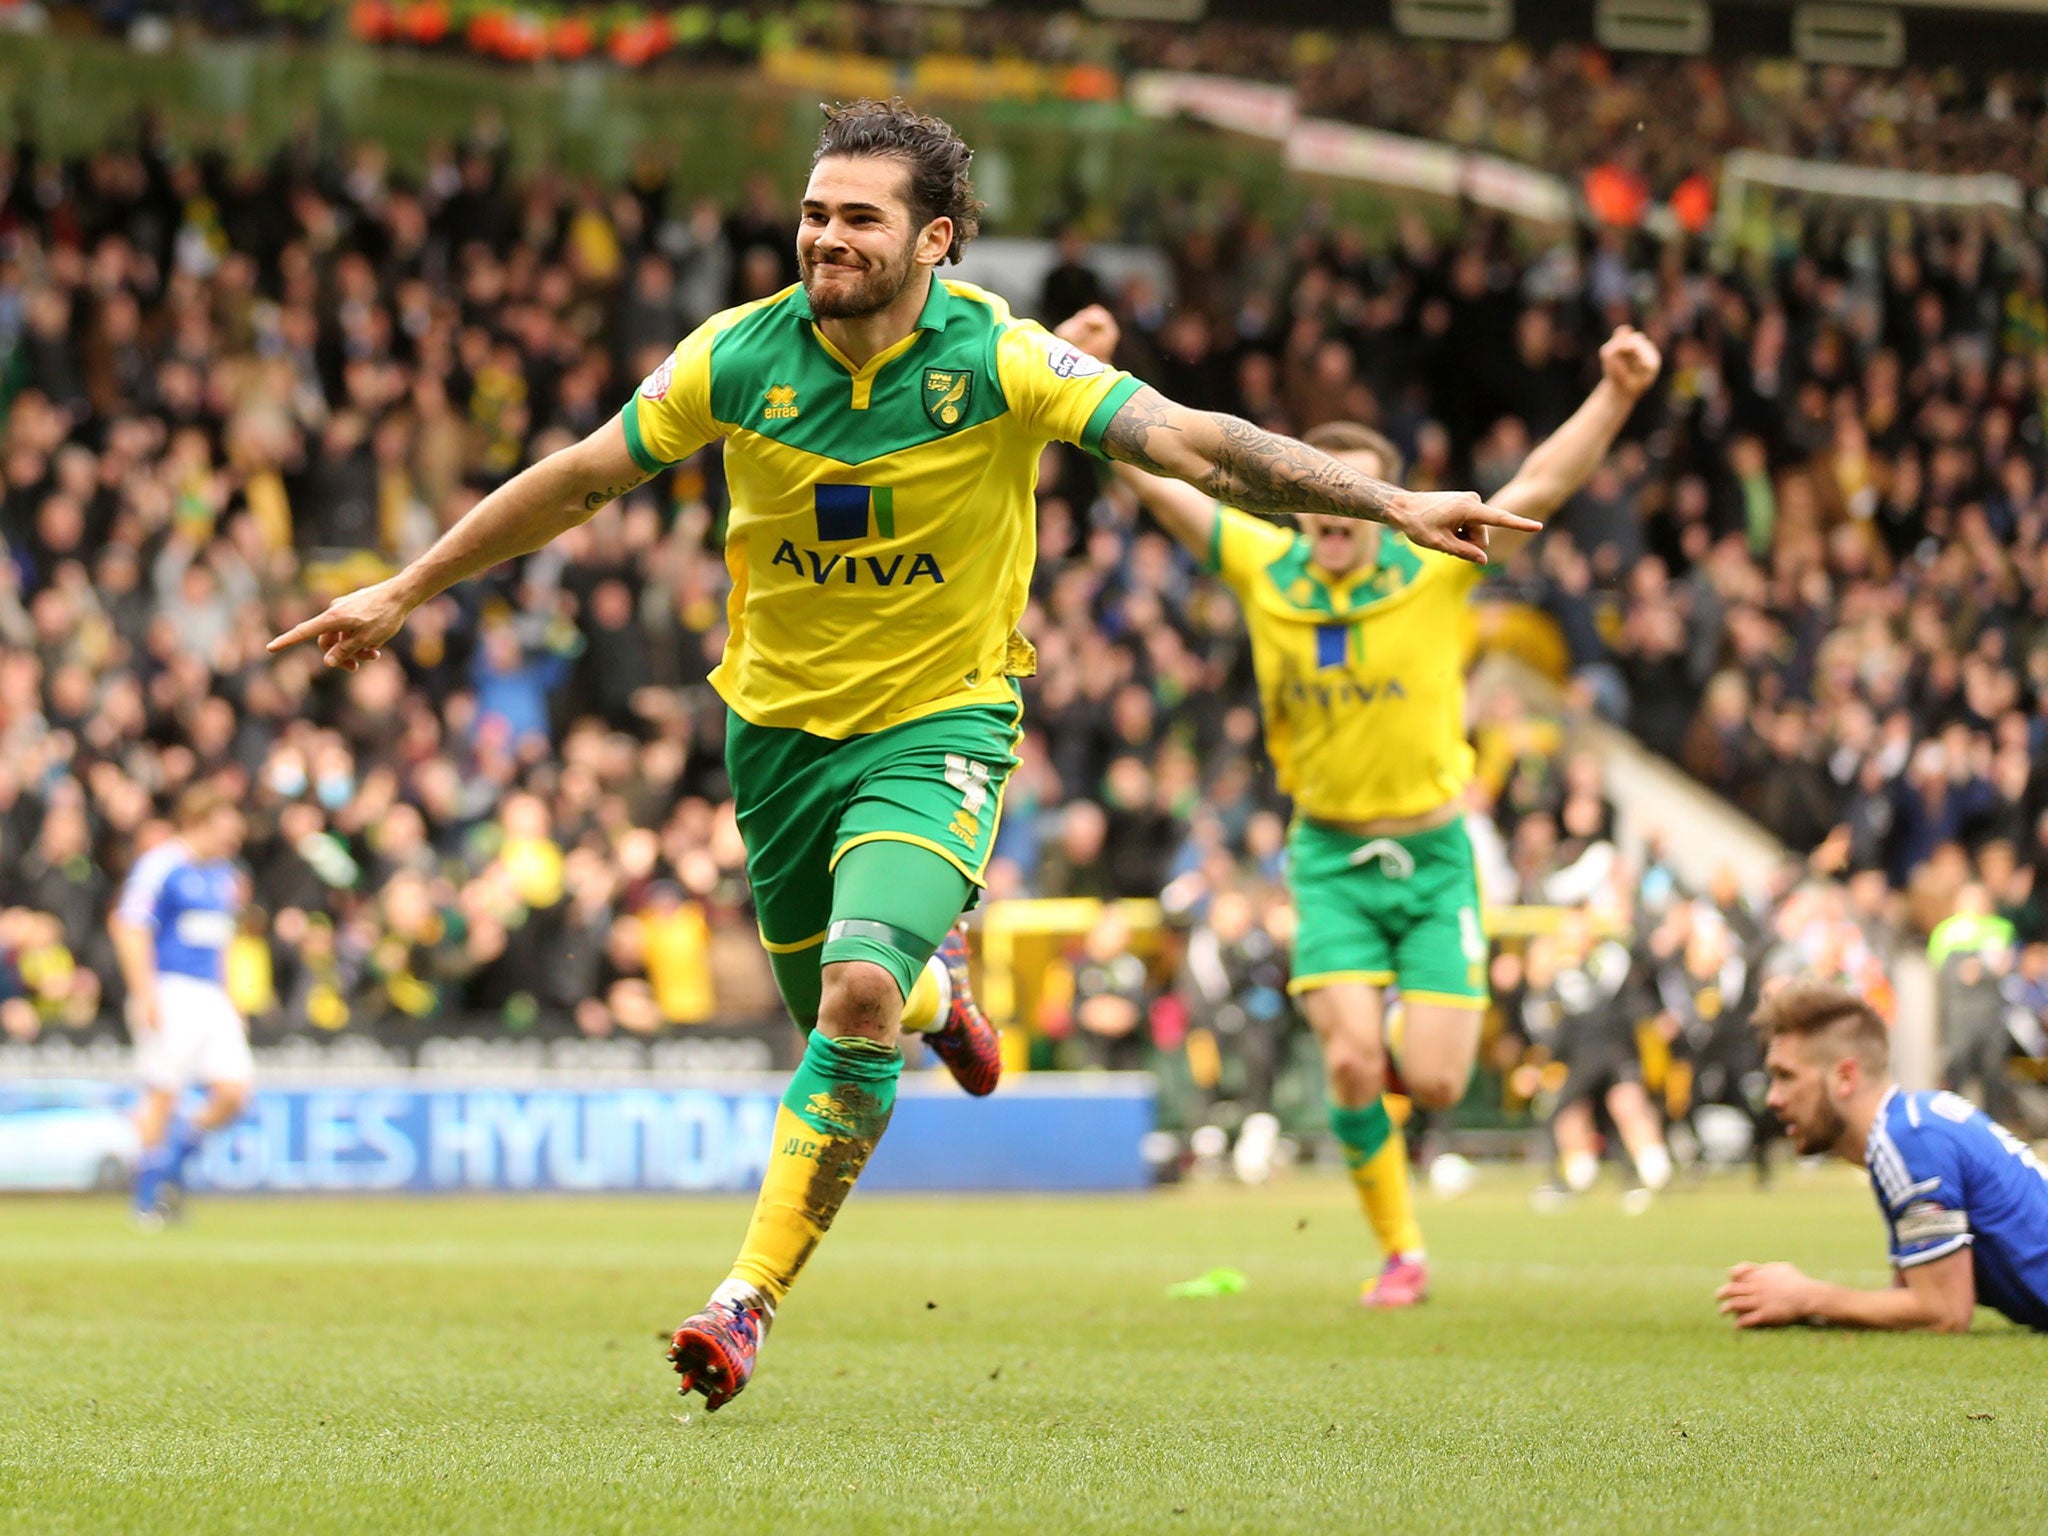 Bradley Johnson celebrates giving Norwich the lead in the derby against Ipswich at Carrow Road – his third goal in four games